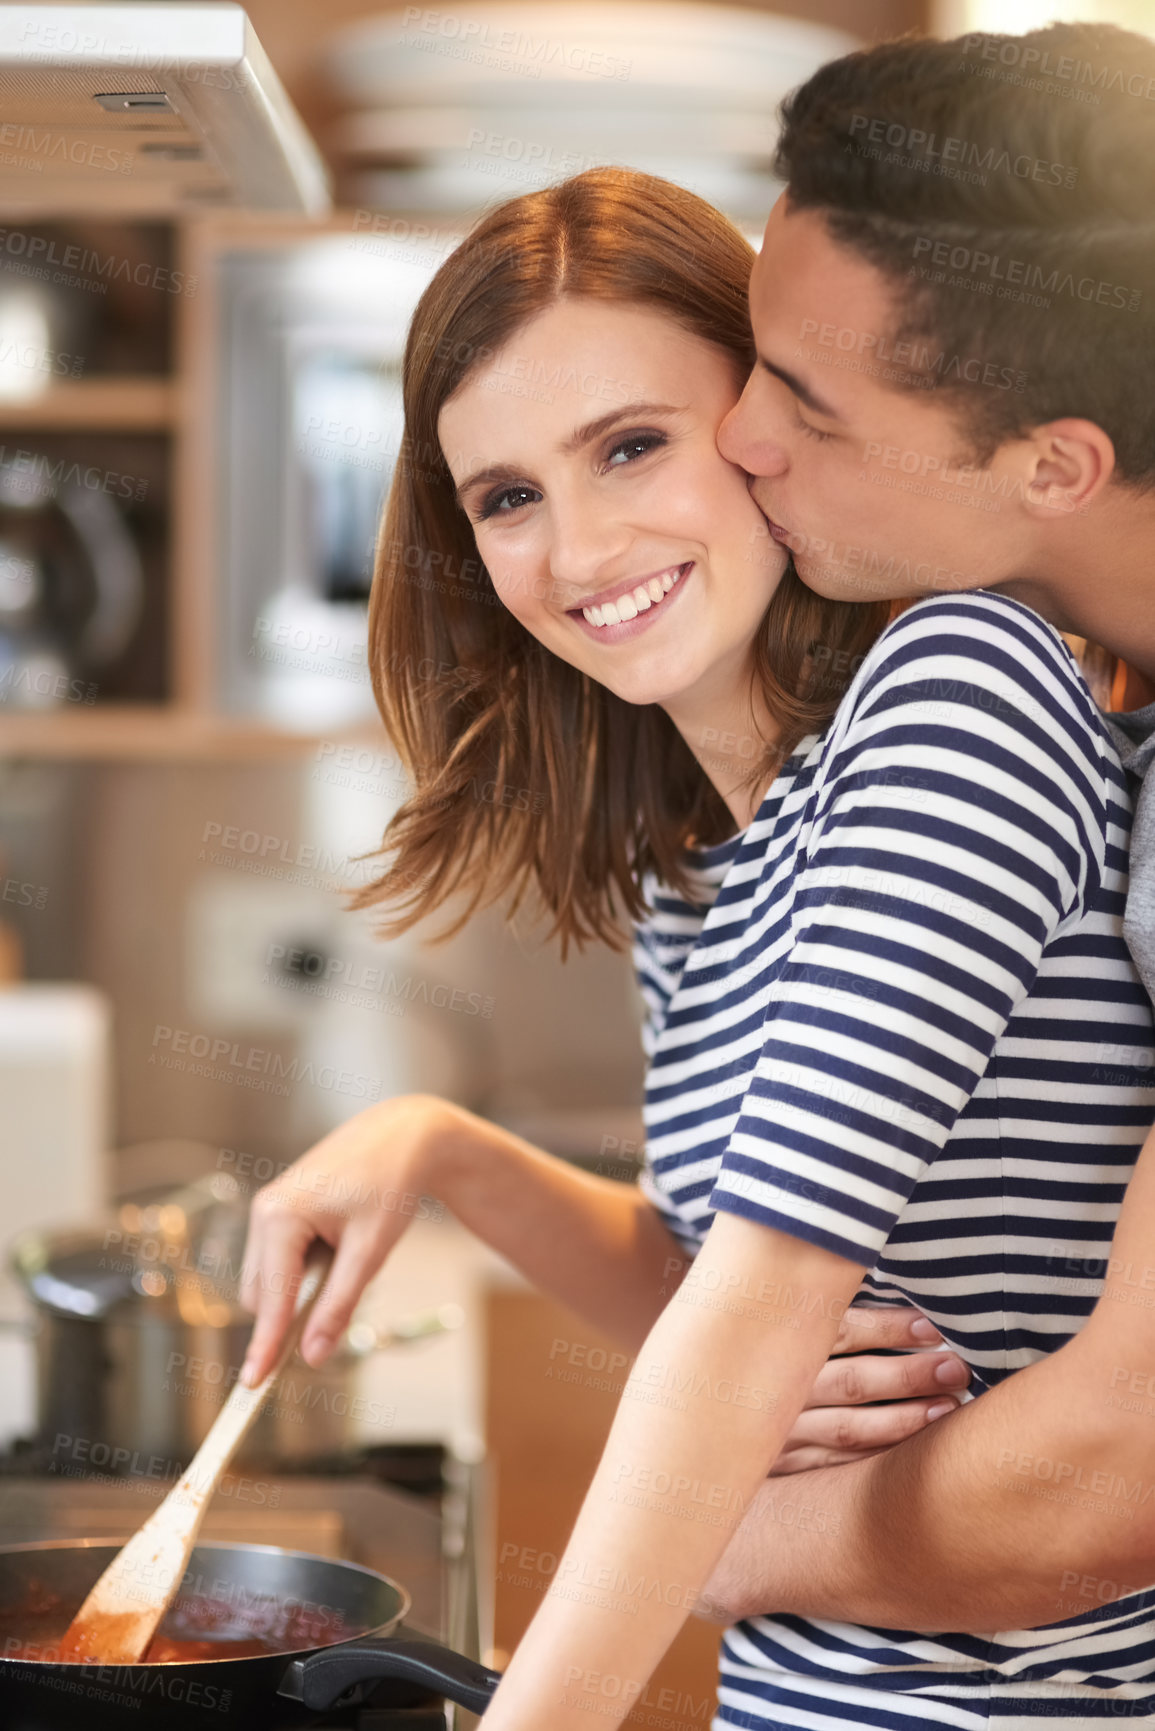 Buy stock photo Portrait of an affectionate young couple cooking a meal together in their kitchen